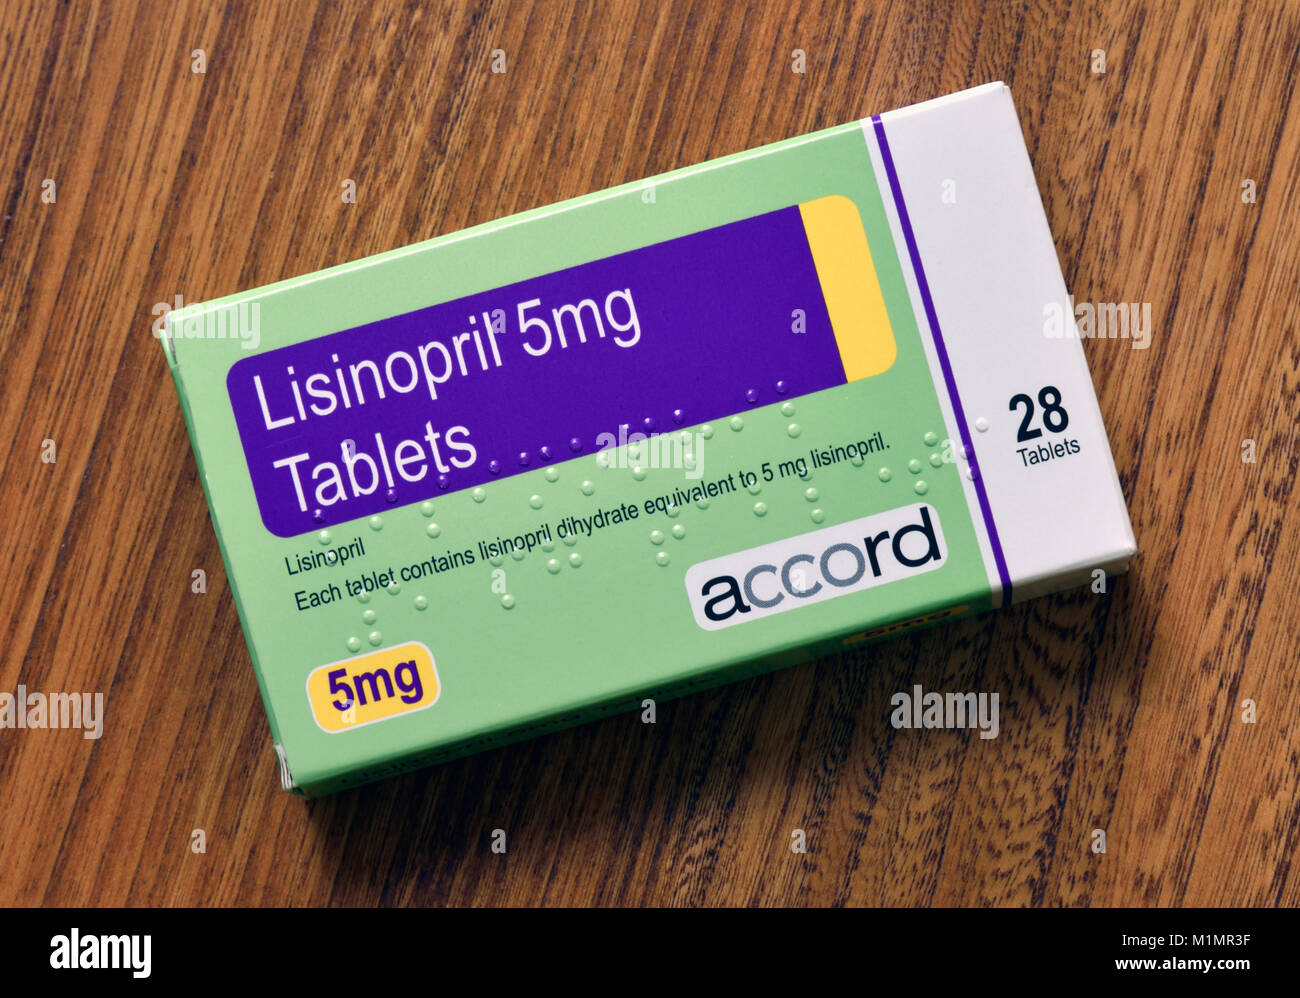 Pack of 28 Lisinopril 5mg Tablets. Each tablet contains lisinopril dihydrate equivalent to 5mg lisinopril. Accord. Stock Photo